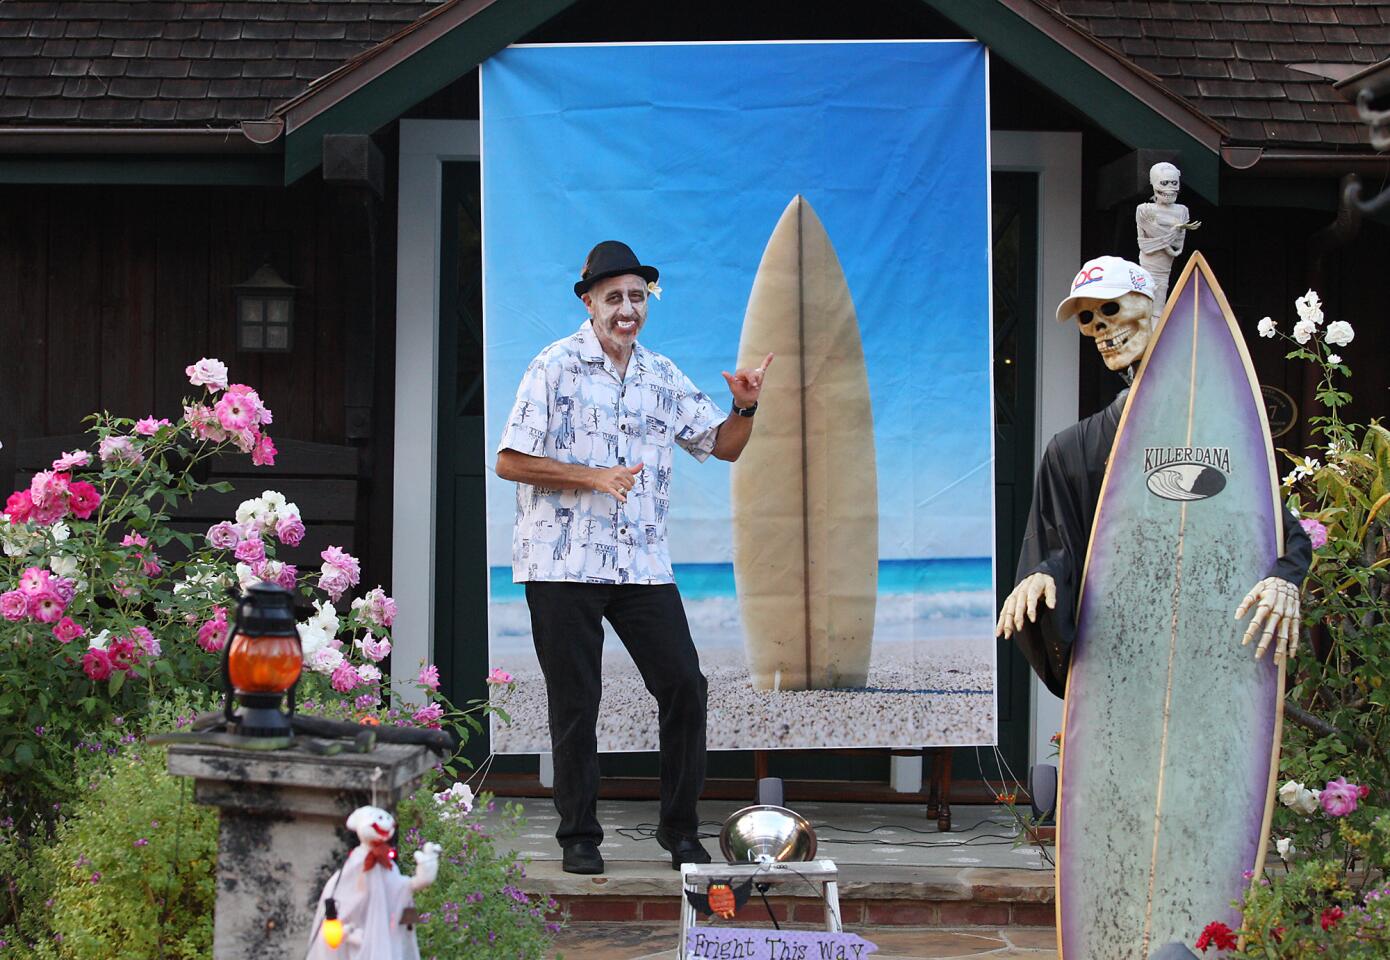 A homeowner dressed as a ghastly surfer dude dances to surf music in front of his home during the Oak Street Halloween Block Party in Laguna Beach on Tuesday evening.